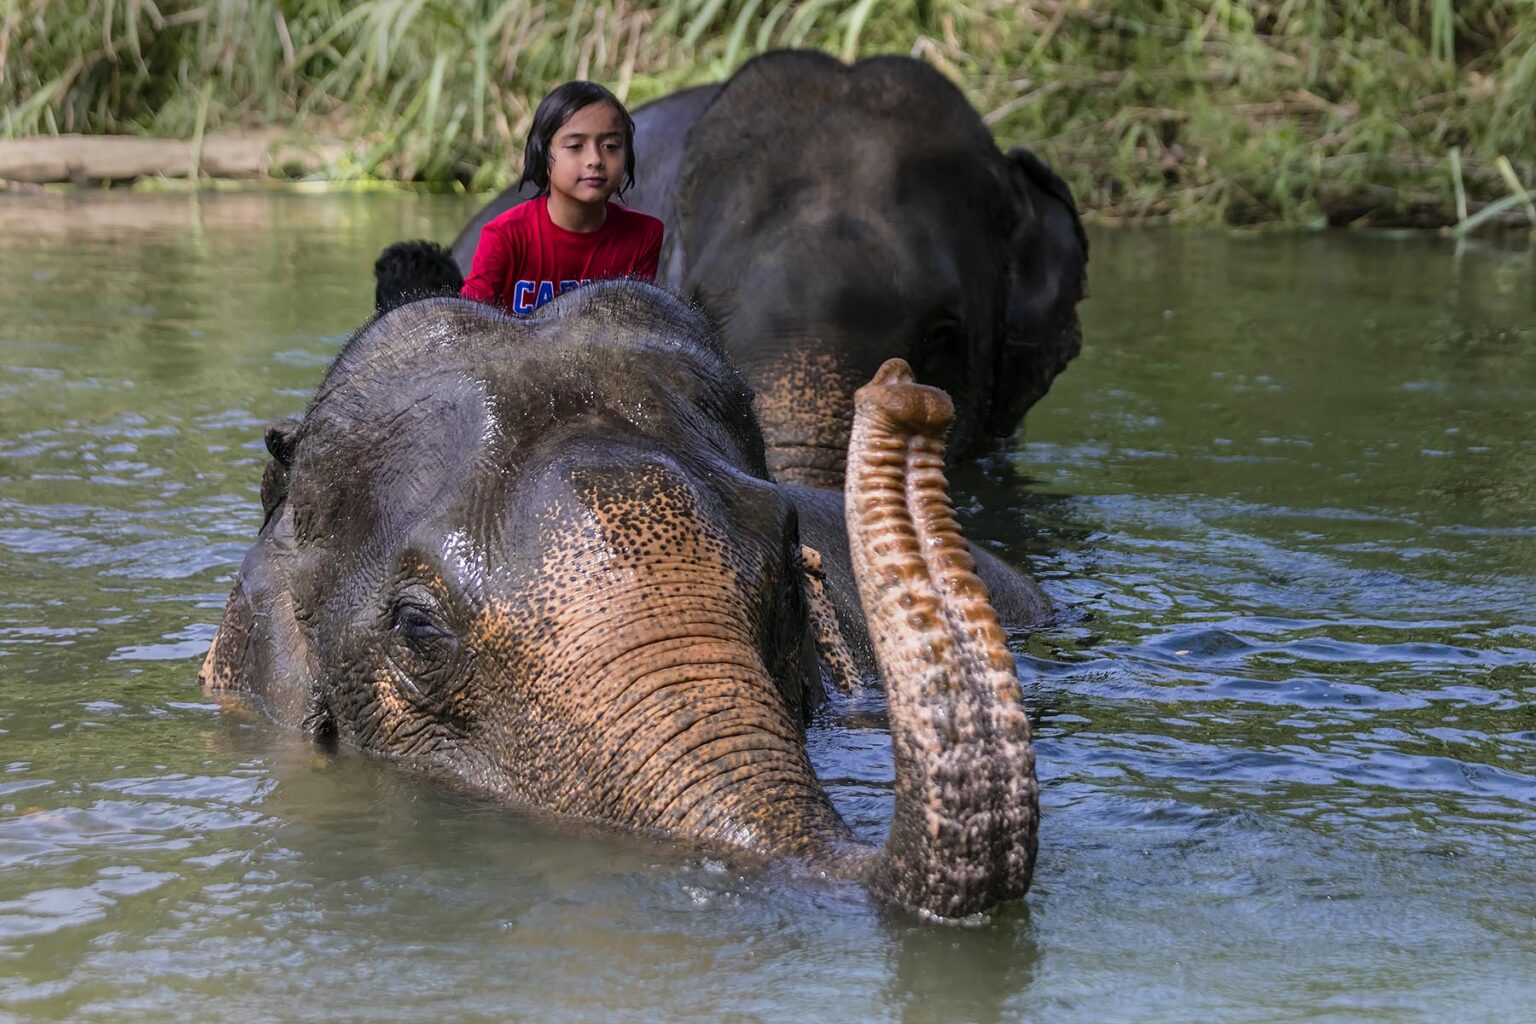 Washing elephants is the human way to support these animals and their mahoots - KHAO SOK, THAILAND